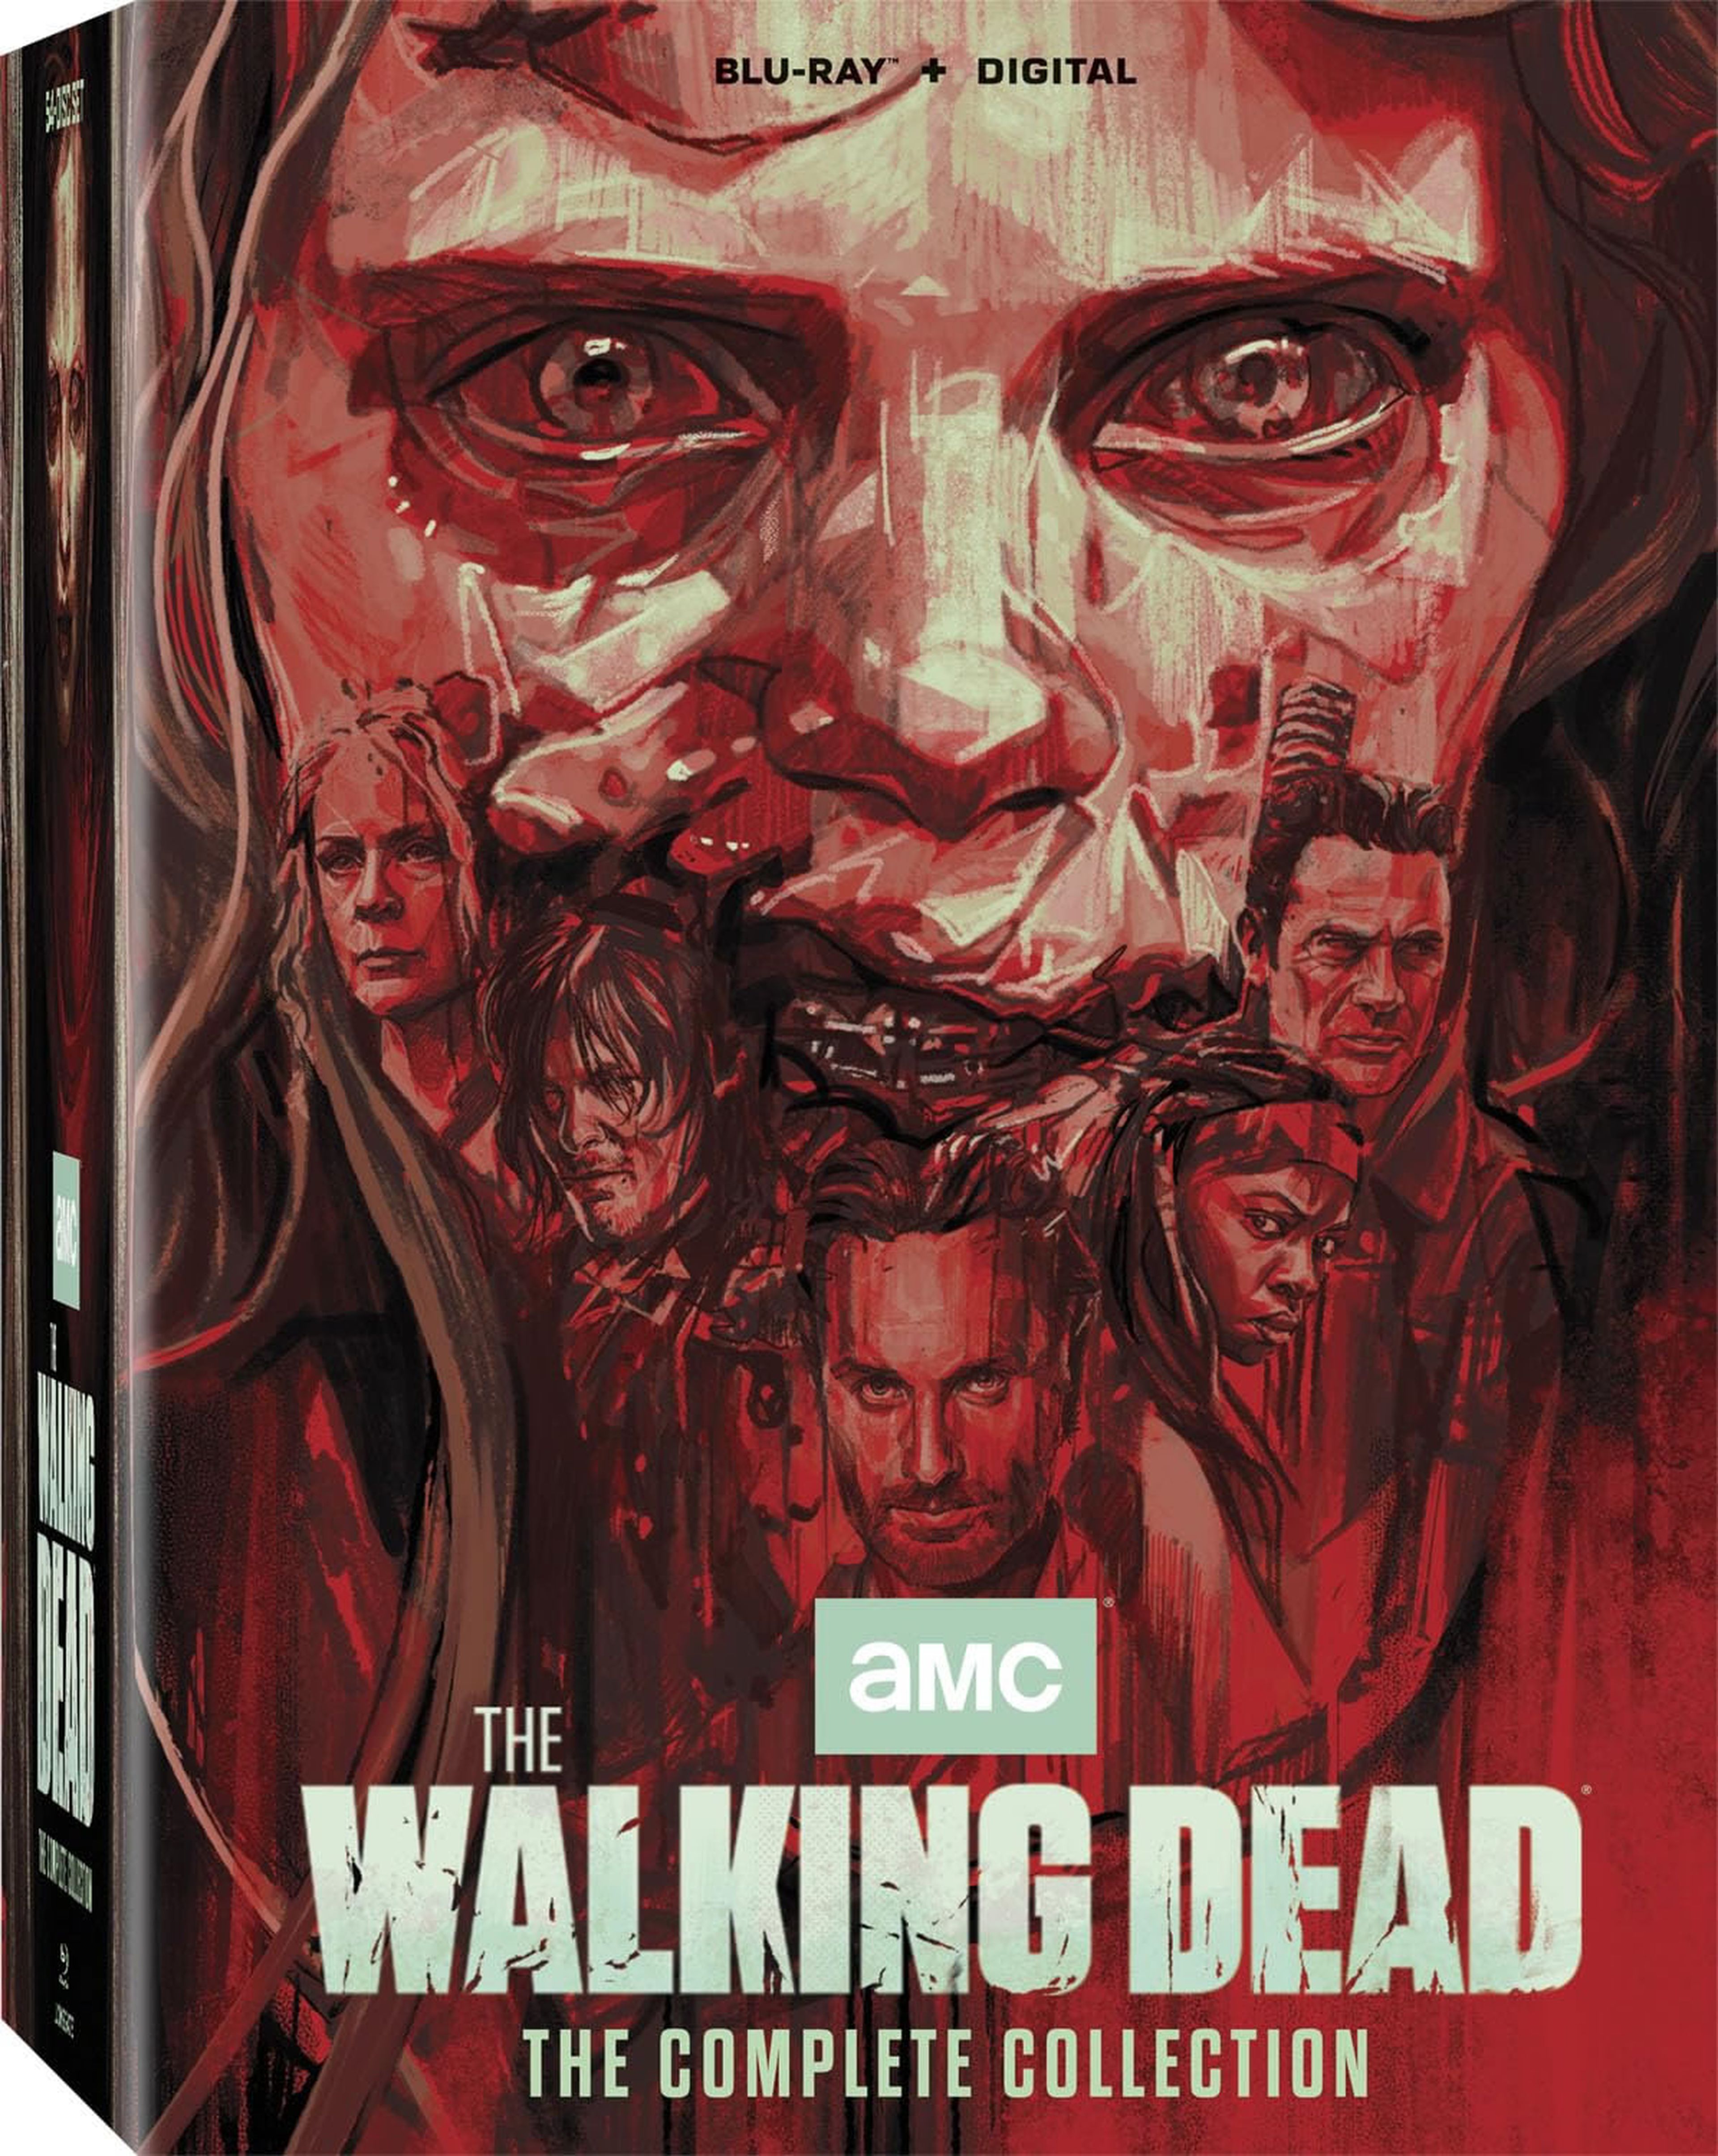 The Walking Dead: The Complete Series Blu-ray